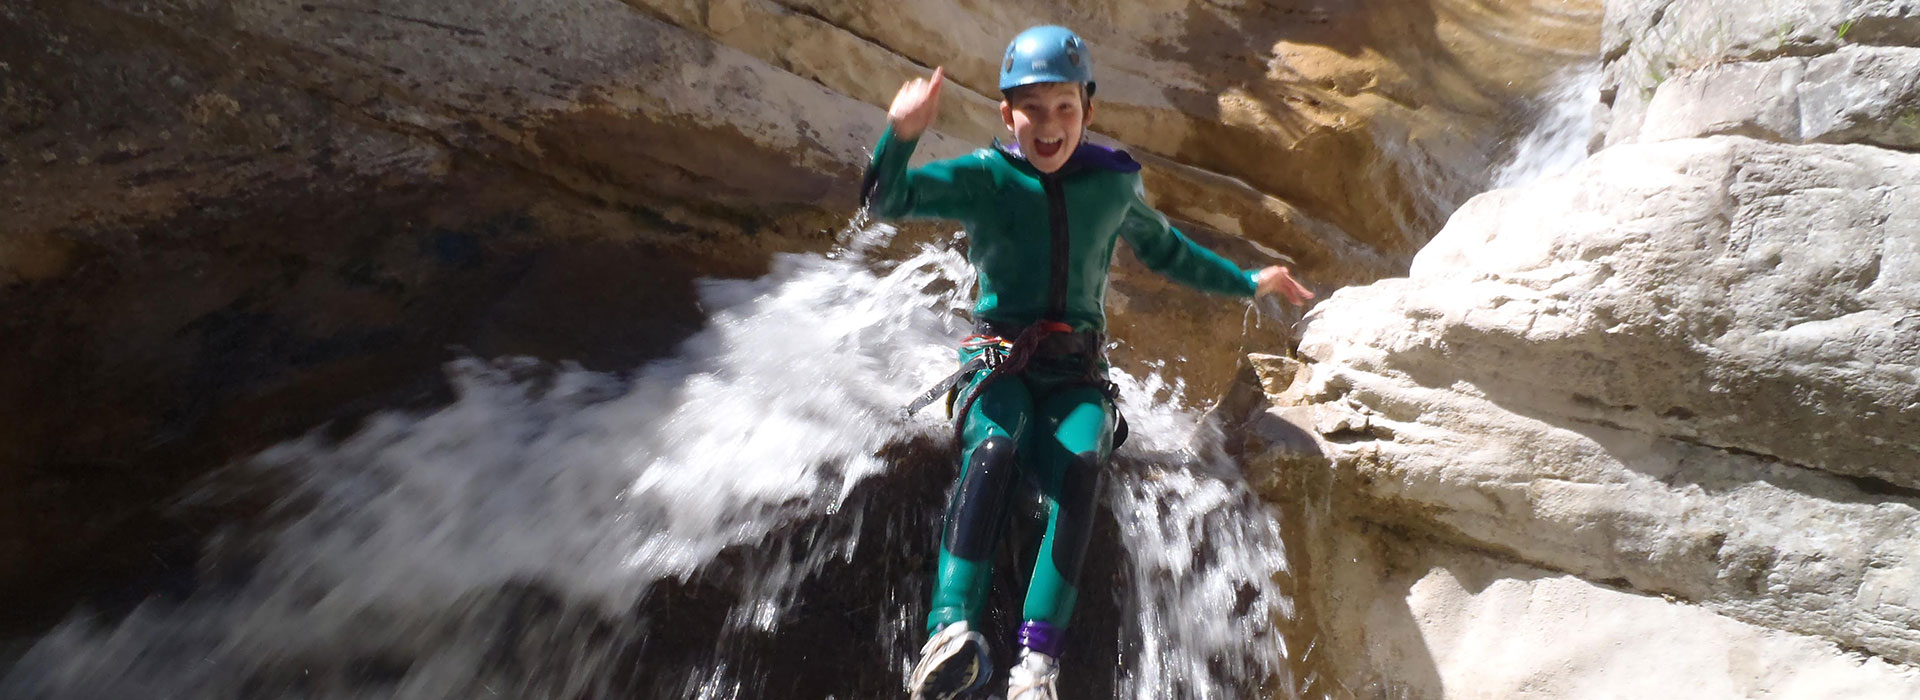 Canyoning in the southern French Alps - boy jumps over a waterfall.